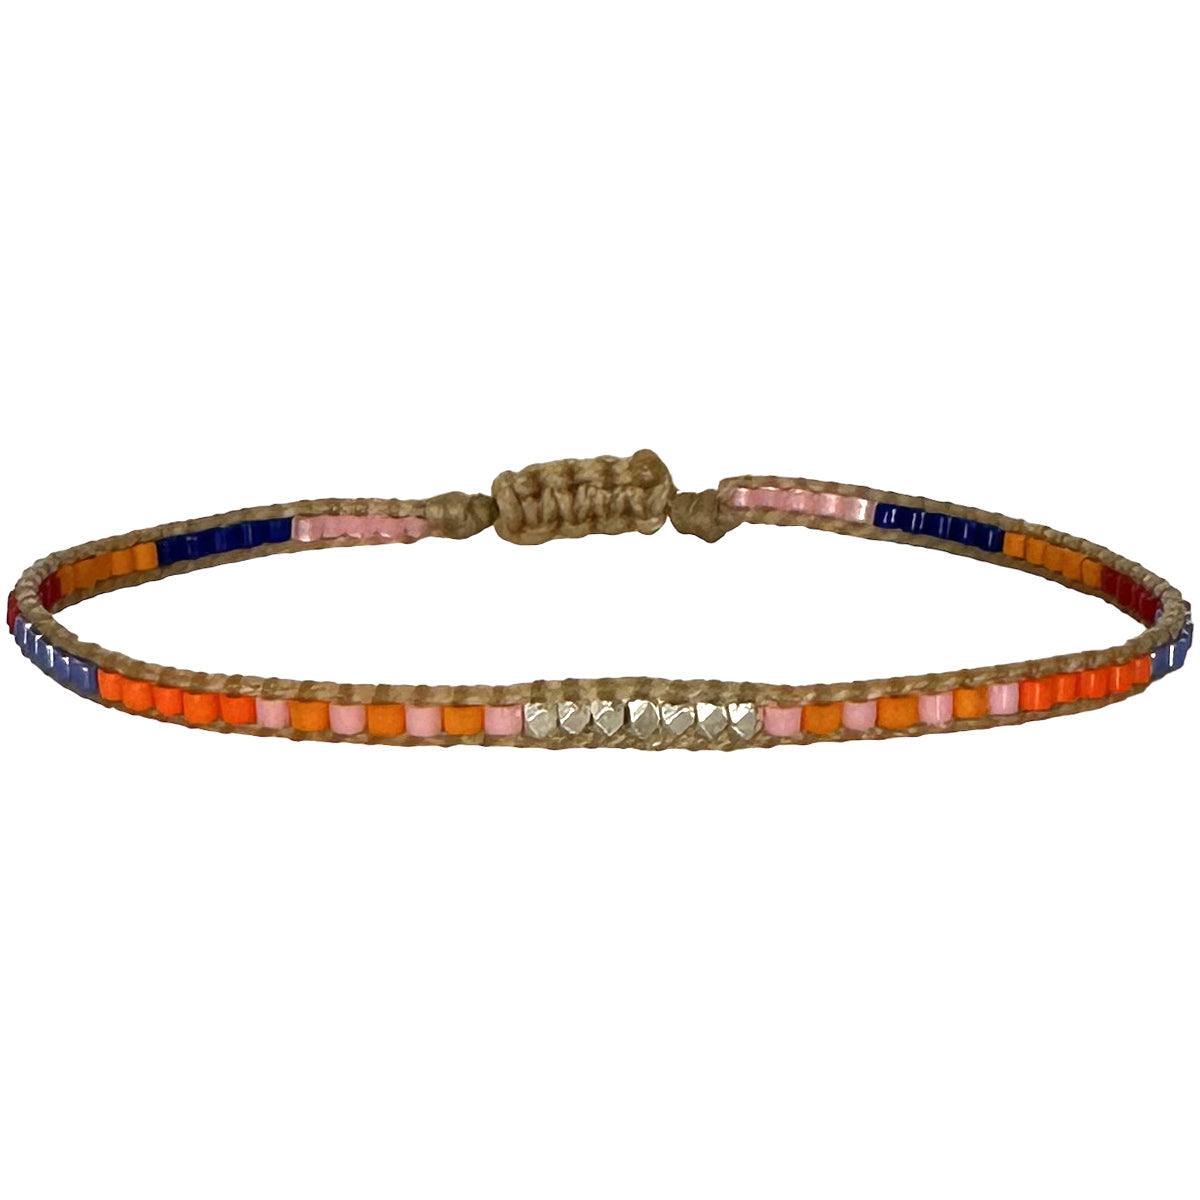 HANDMADE BEADED BRACELET IN BRIGHT TONES WITH SILVER DETAIL